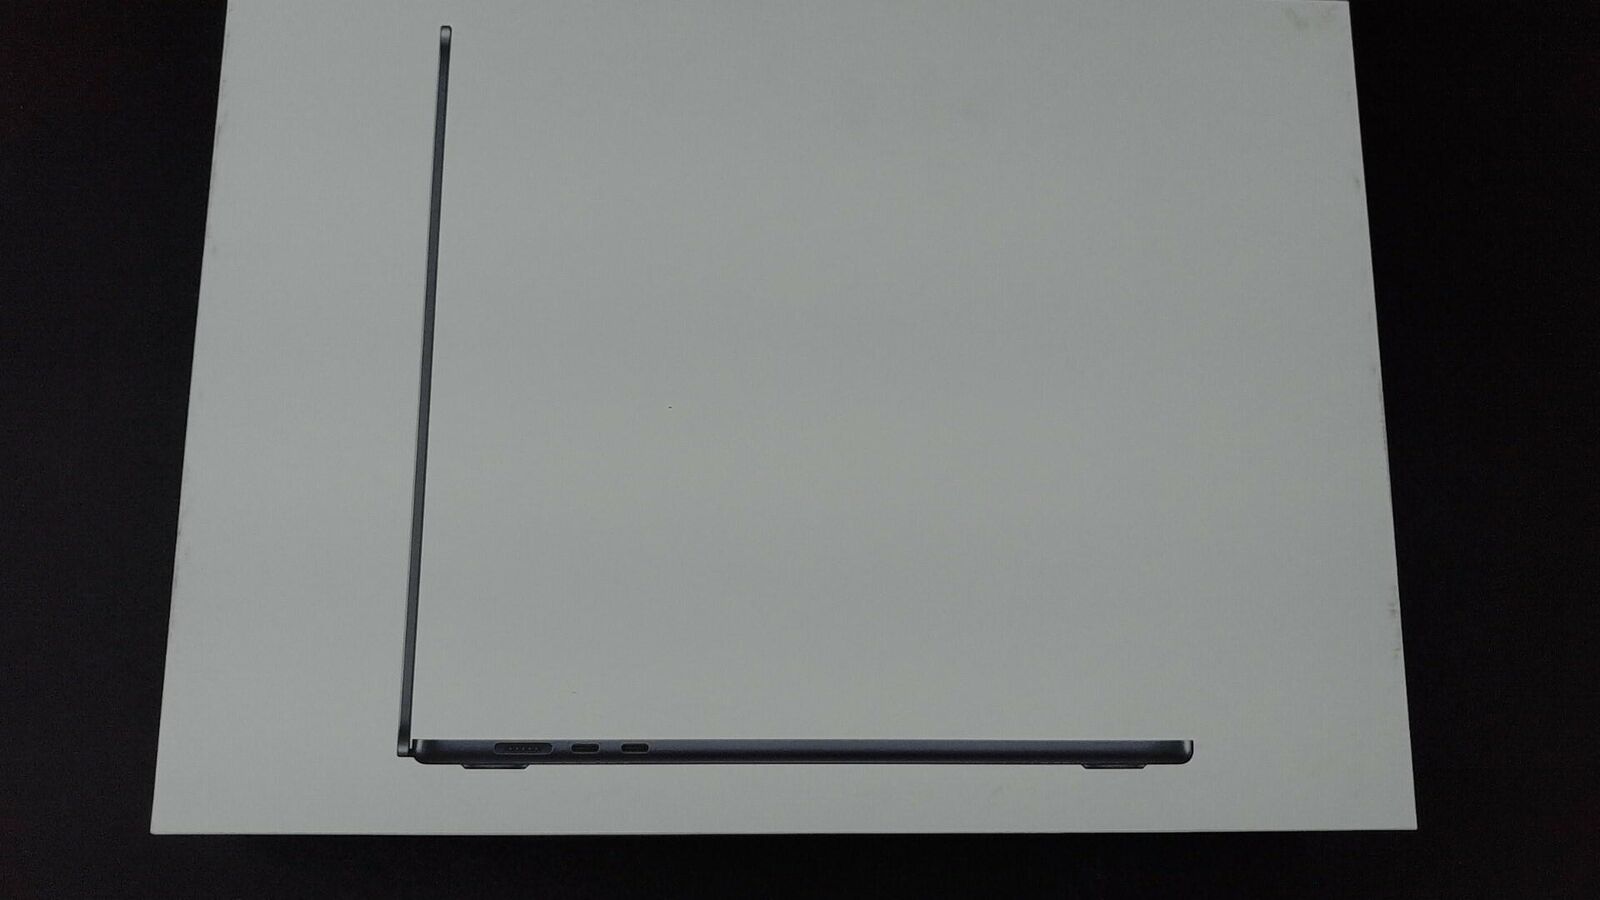 Authentic Apple 2023 MacBook Air Laptop with M2 chip:SN-SH6230KP3HR